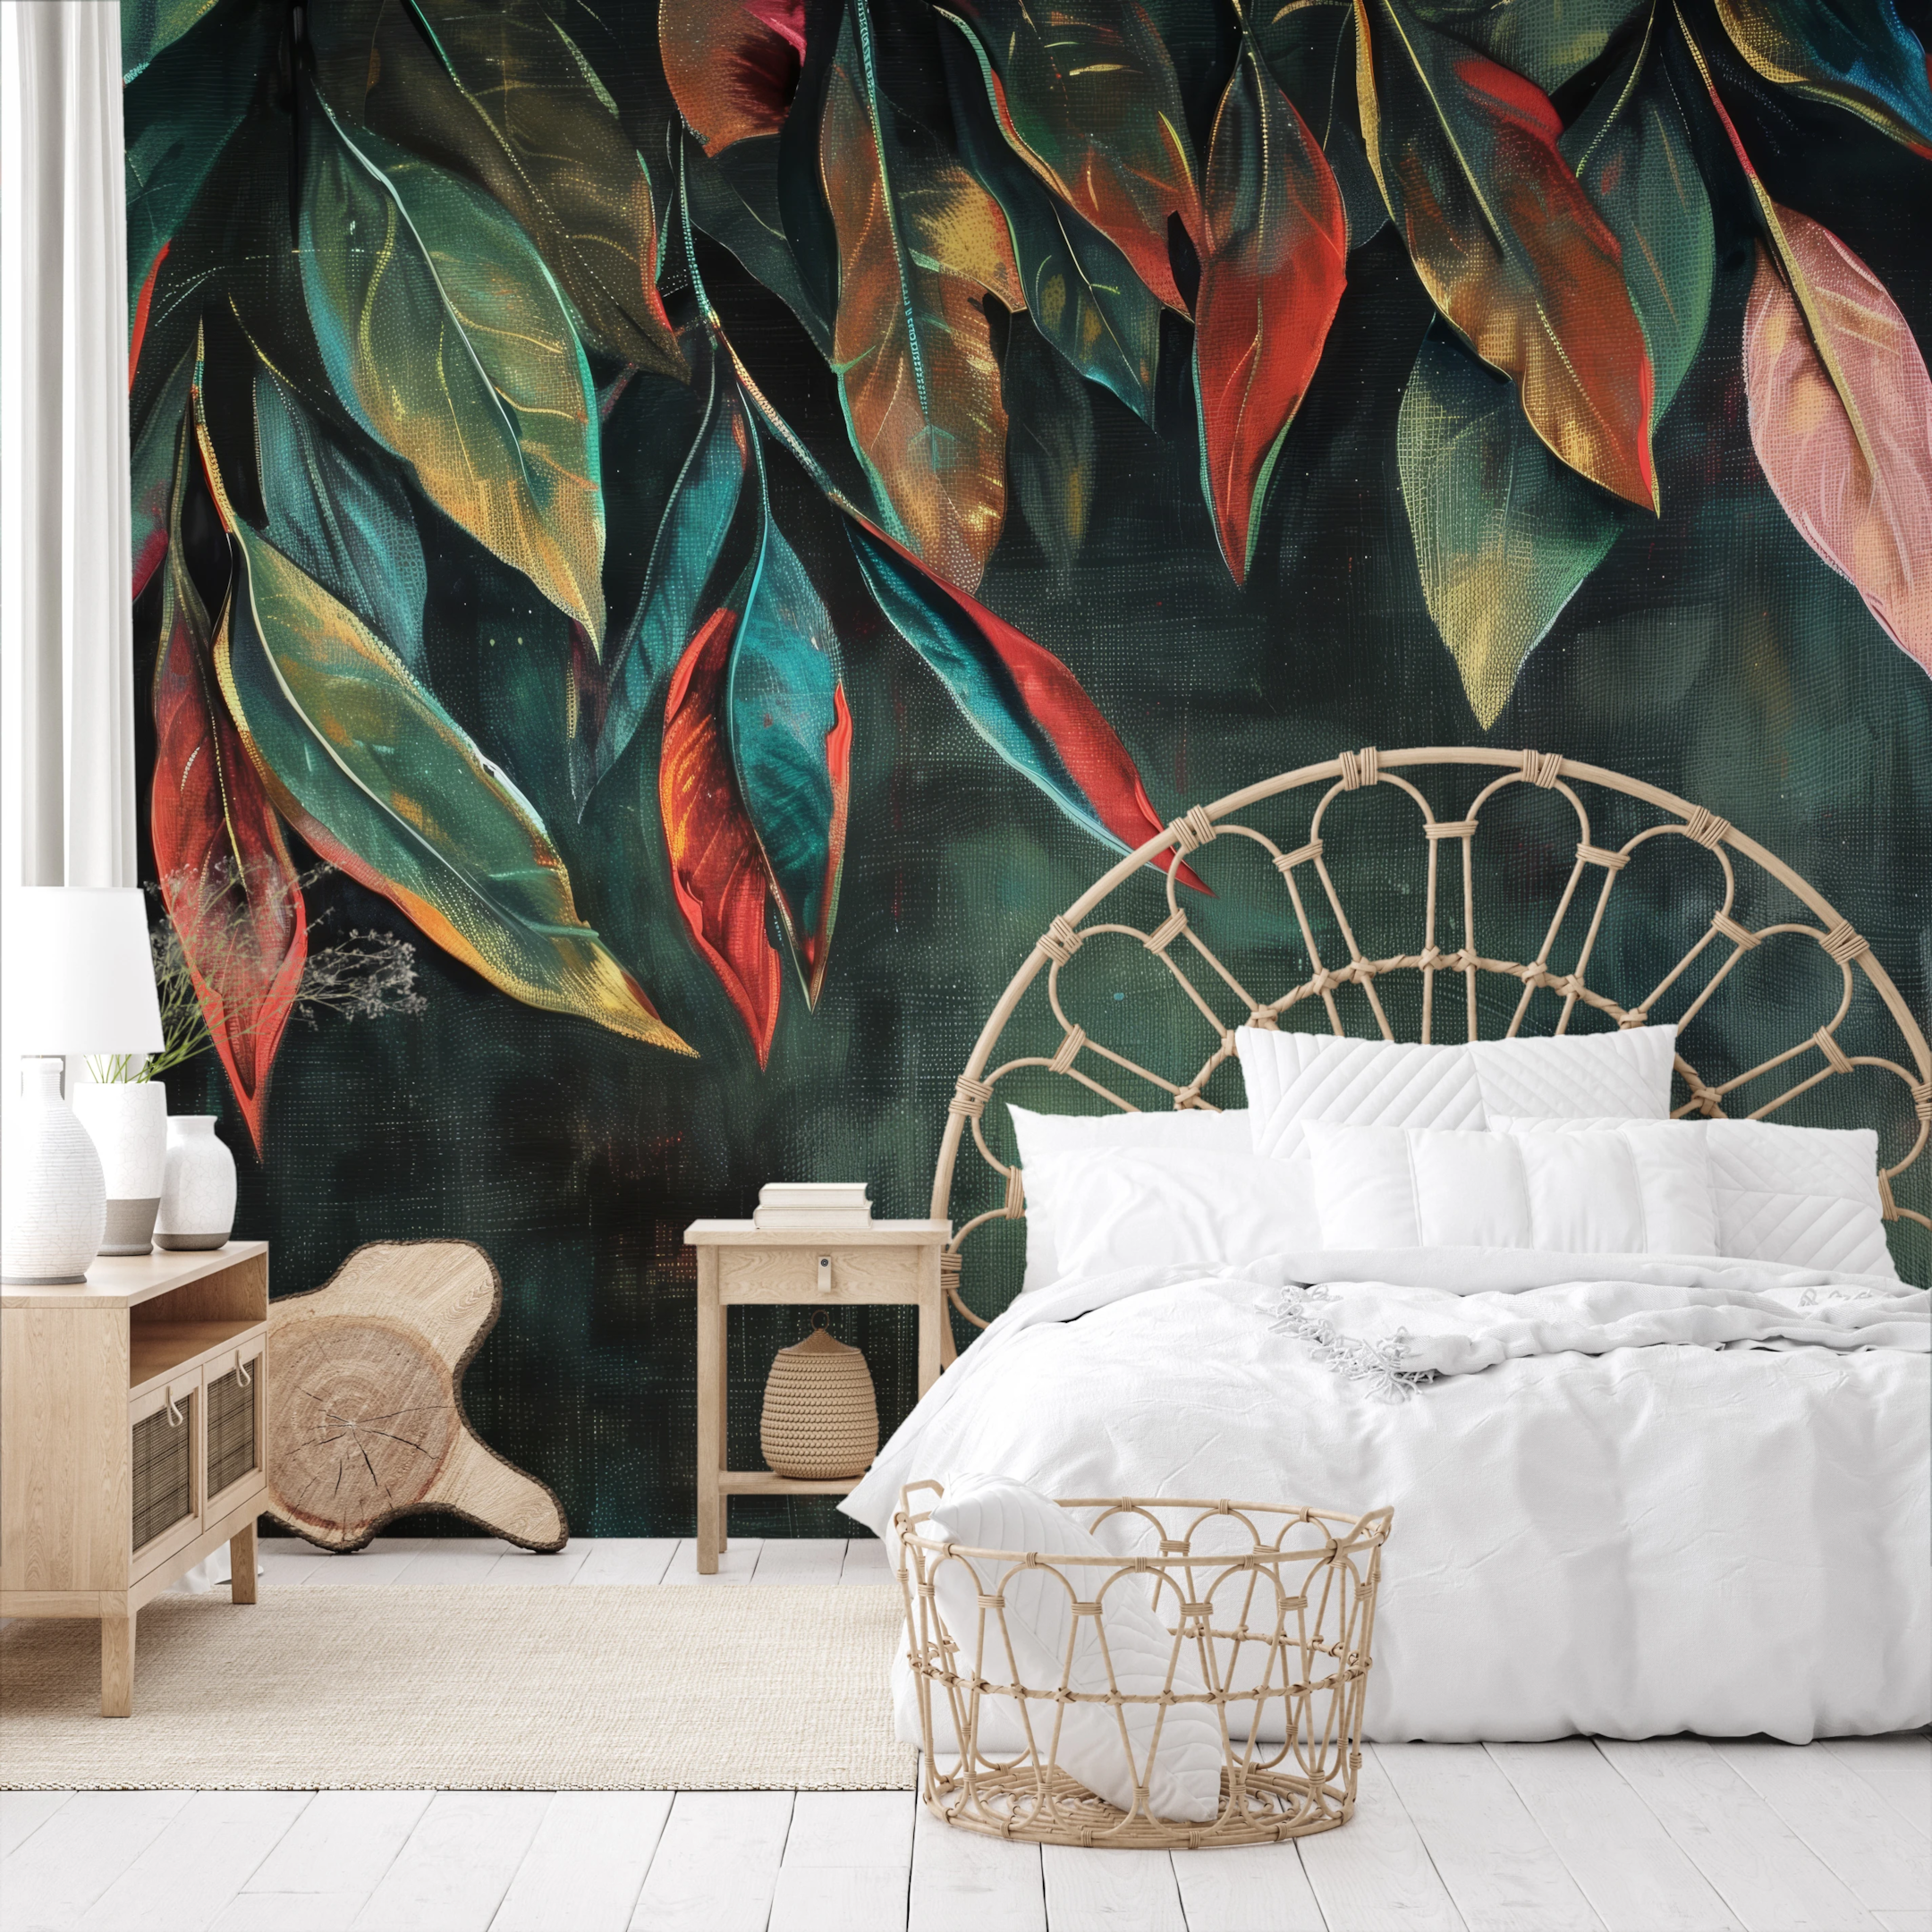 A subtle photo wallpaper with leaves in rich shades of dark green and navy blue, introducing harmony and peace, great for bedrooms or elegant living rooms.